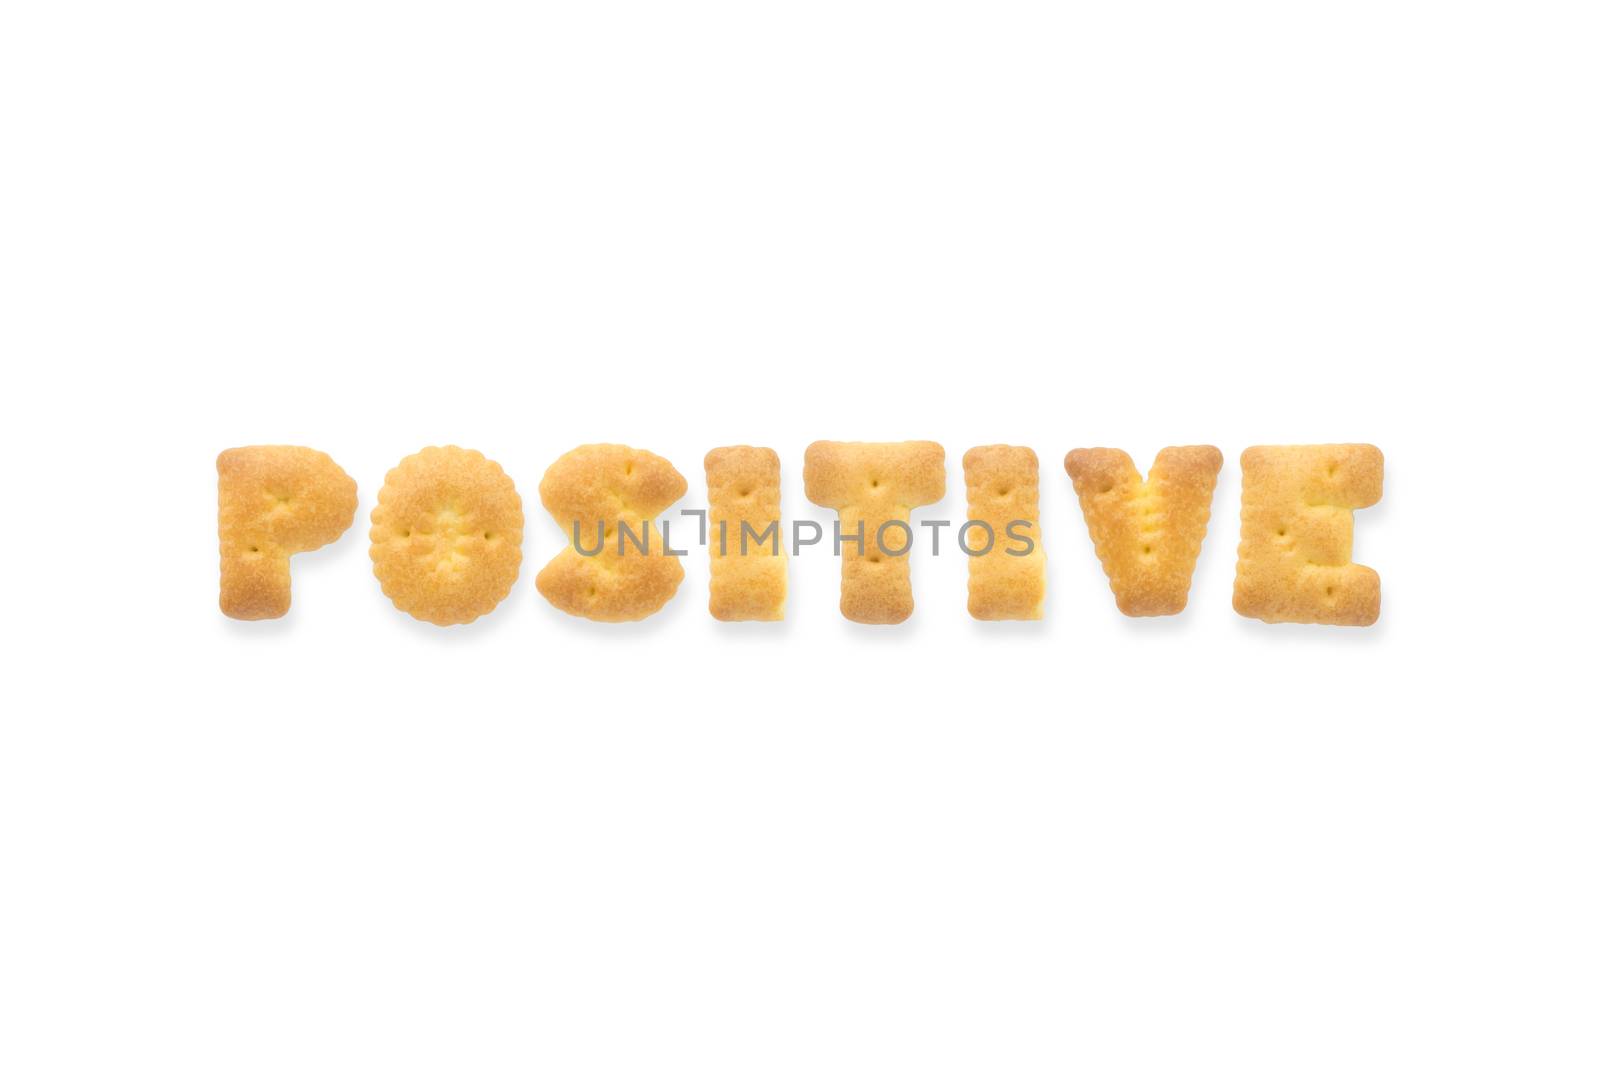 Collage of text word POSITIVE. Alphabet biscuit cracker isolated on white background